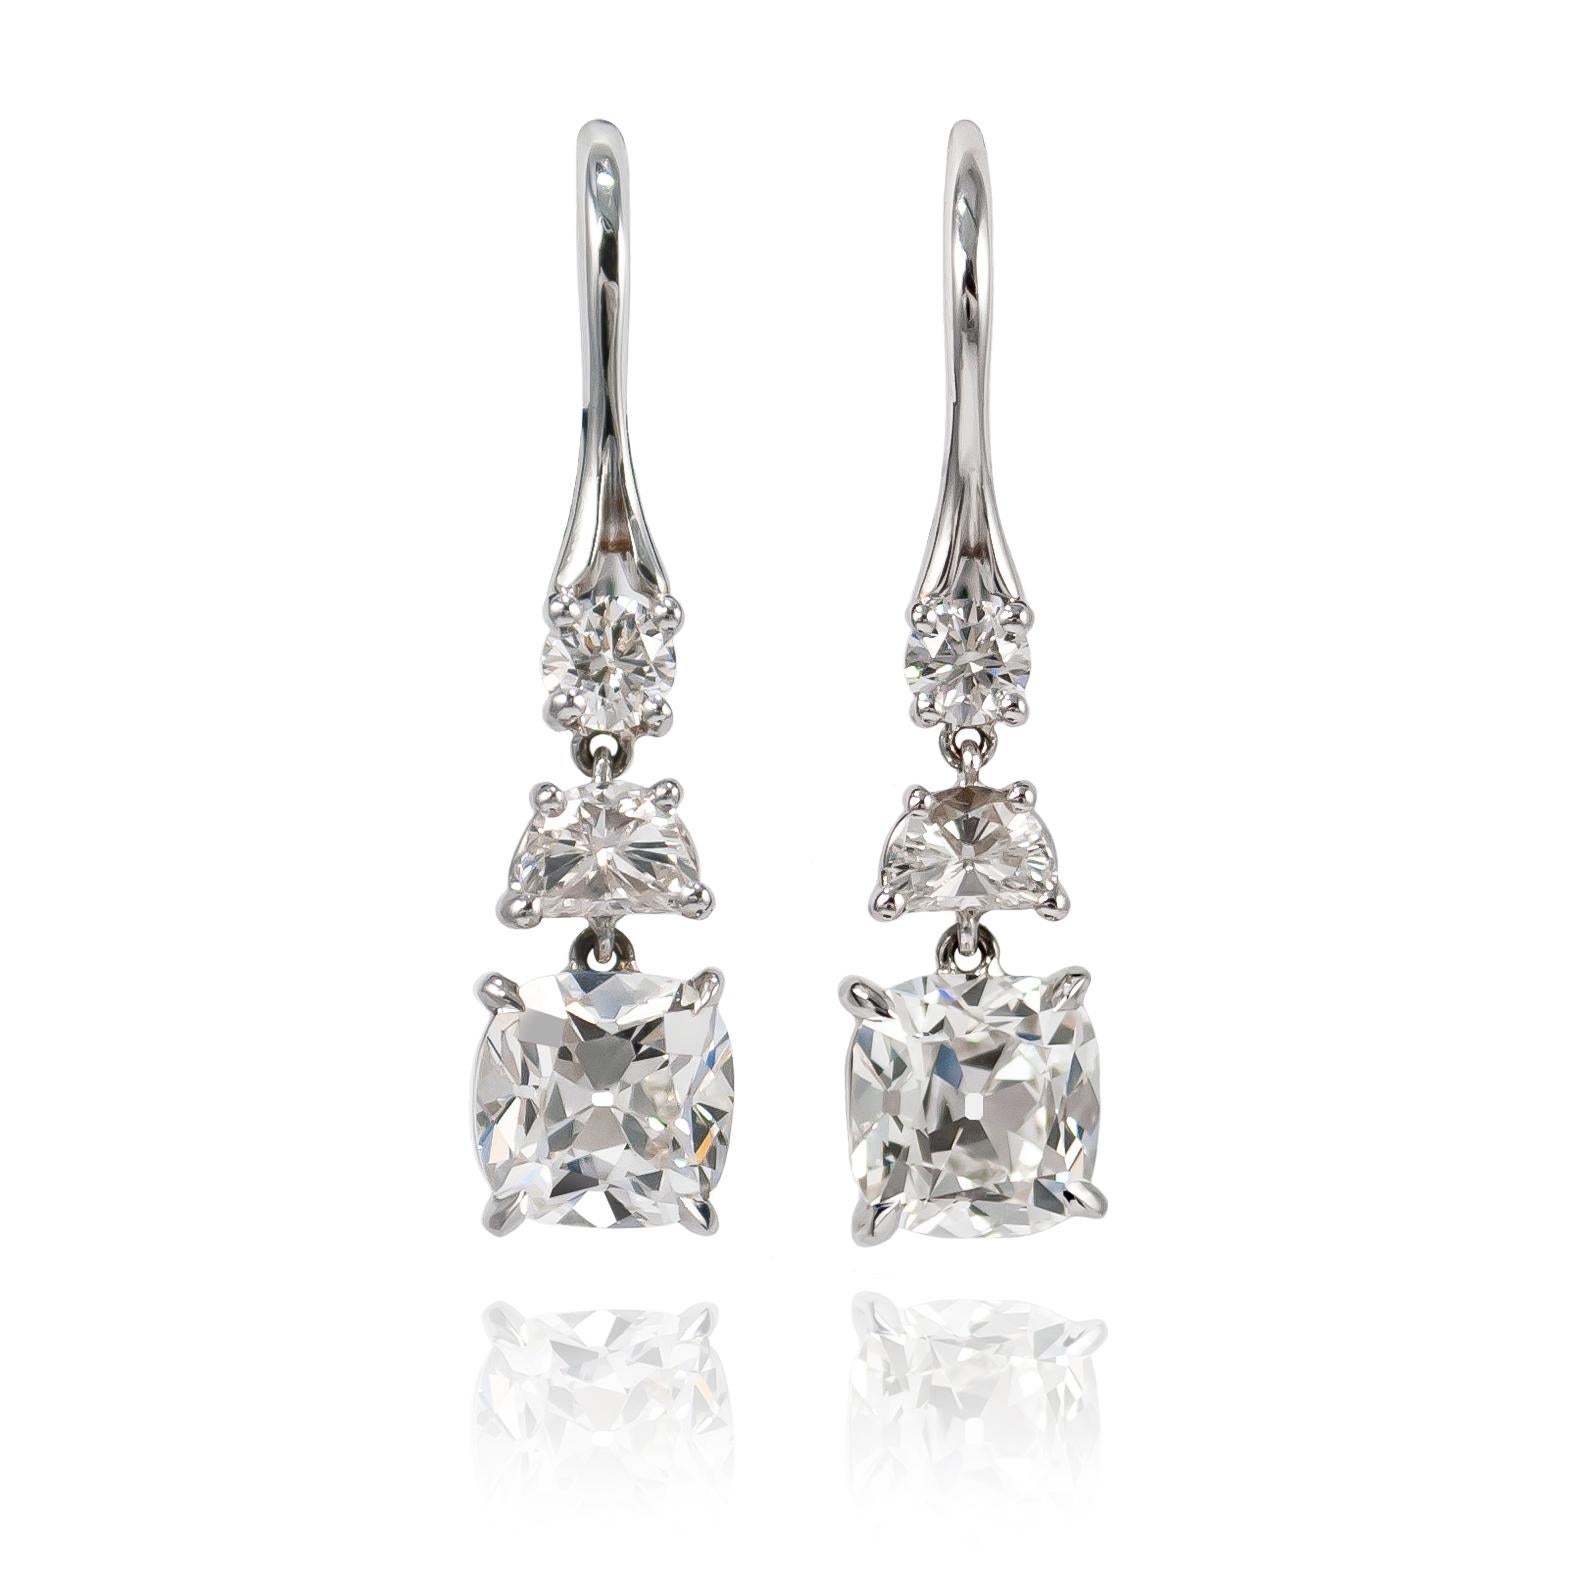 These fantastic drop earrings will become an everyday staple of your jewelry collection! Handmade in 18K white gold, these drops feature a pair of Brilliant Rounds = 0.78 ctw, Half Moons = 0.48 ctw, and GIA certified 1 carat Cushion Brilliant cut